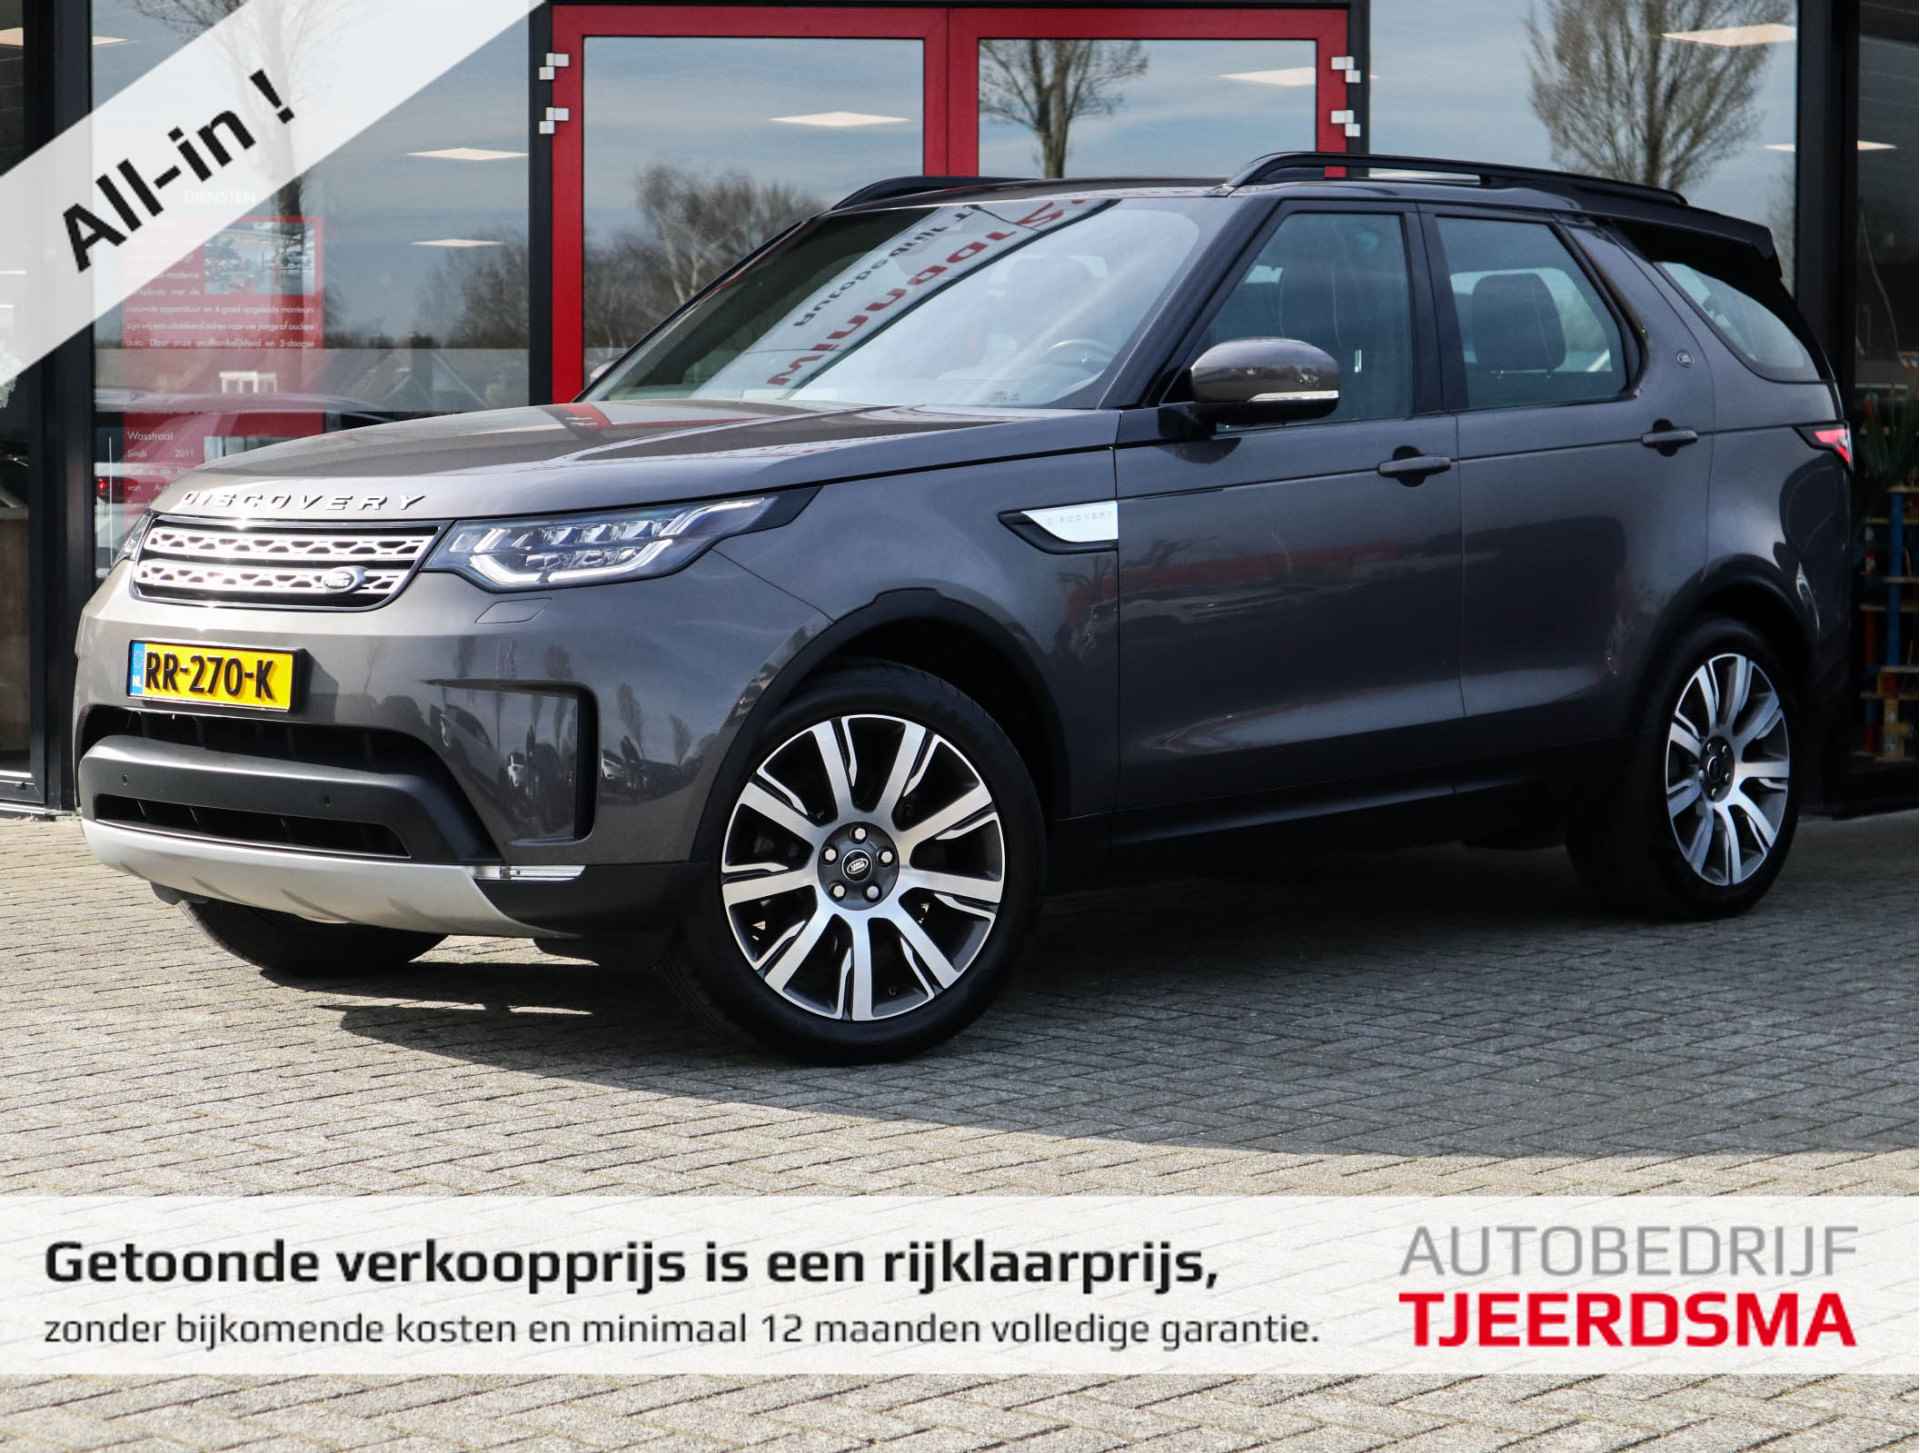 Land Rover Discovery 2.0 Sd4 HSE Luxury 7p. Navi/Clima/Leder/Panodak/7-Persoons/Luchtvering/Trekhaak - 1/34